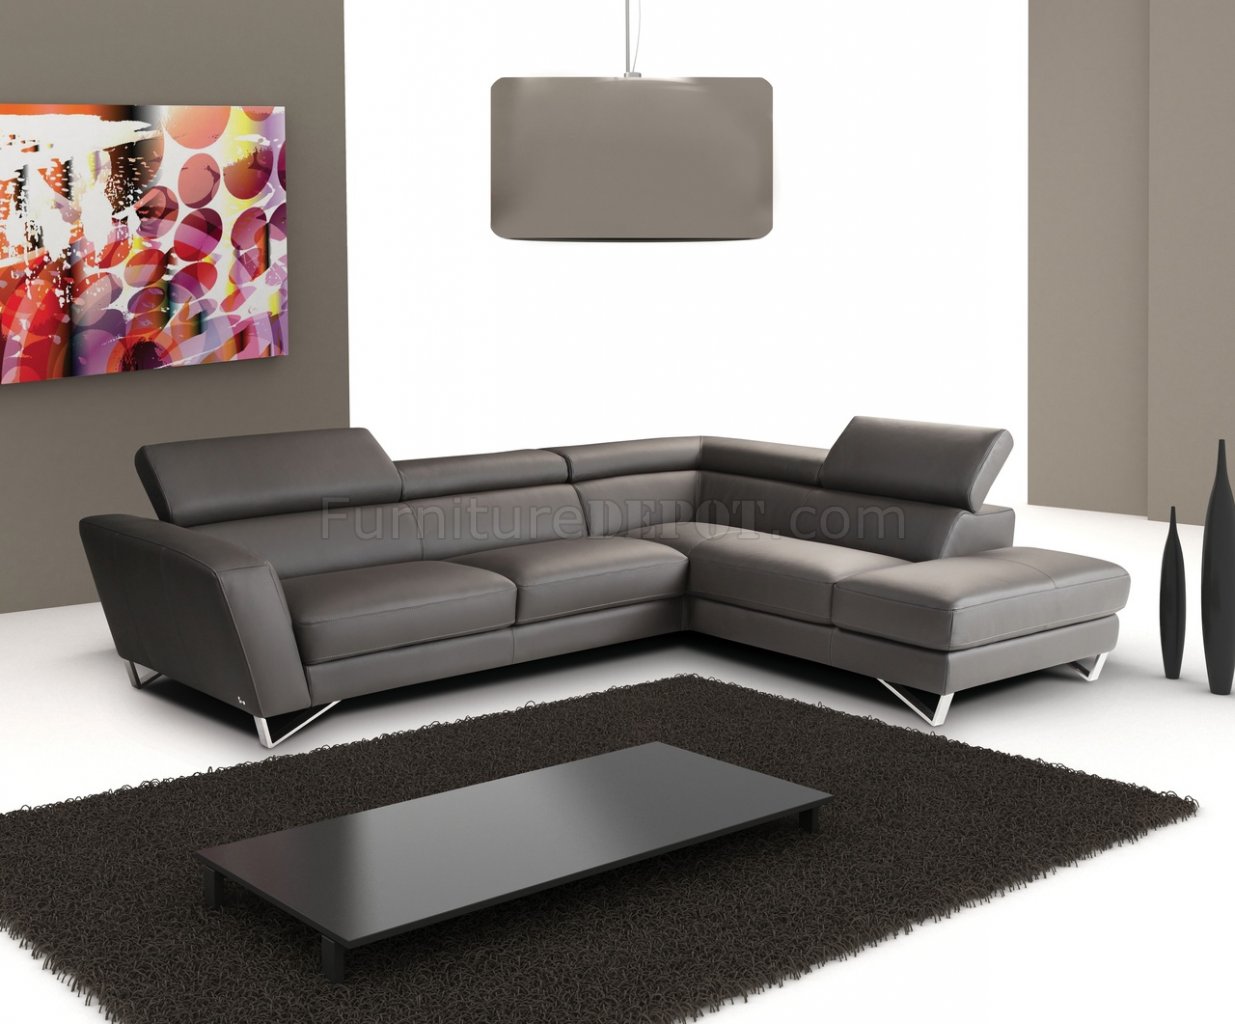 Full Leather Modern Sectional Sofa, Grey Leather Sectionals With Chaise